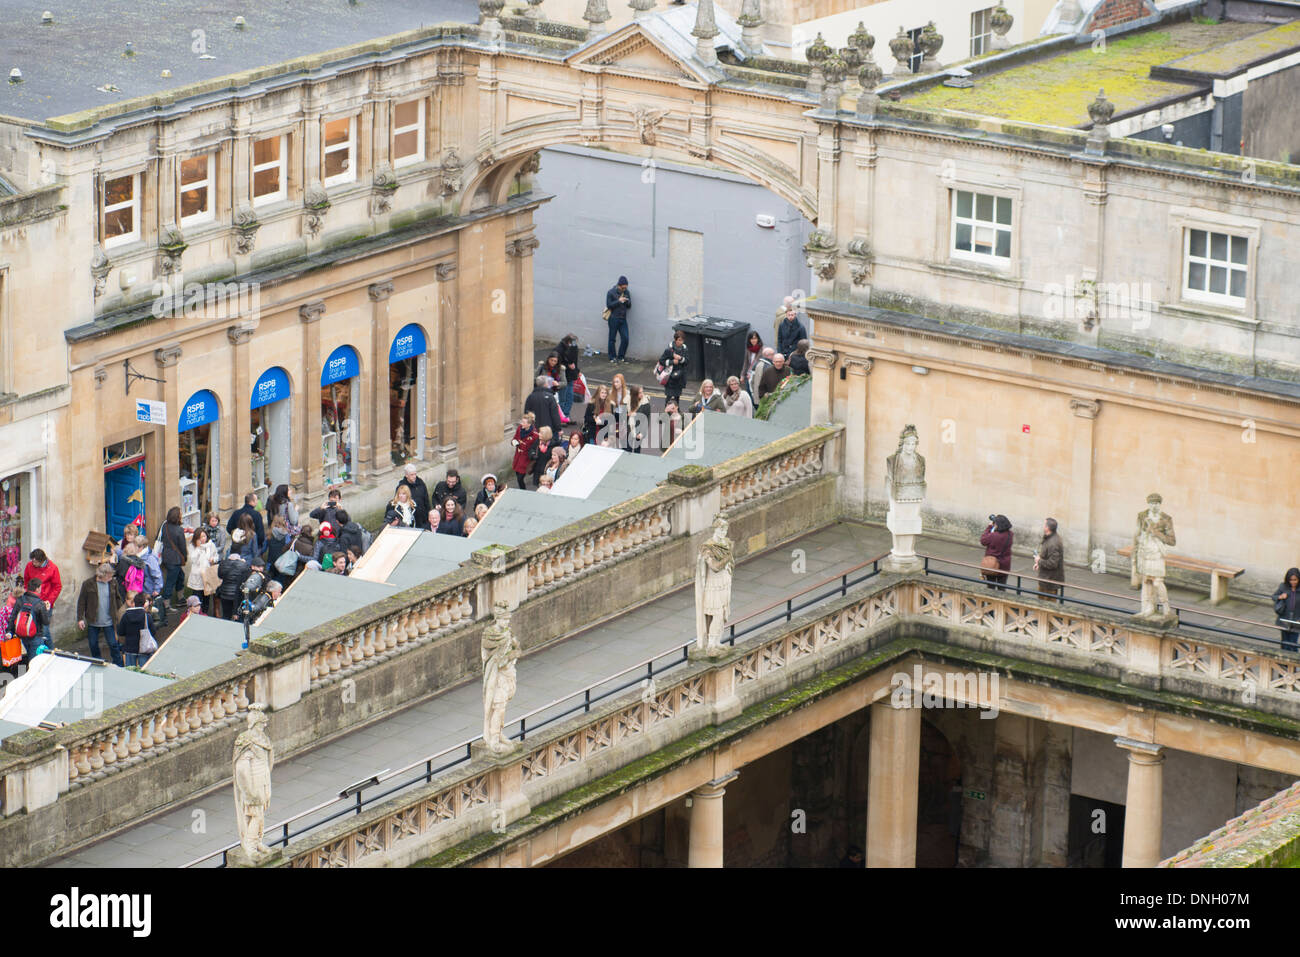 View across Bath roman baths with people shopping at Christmas market 2013 Stock Photo